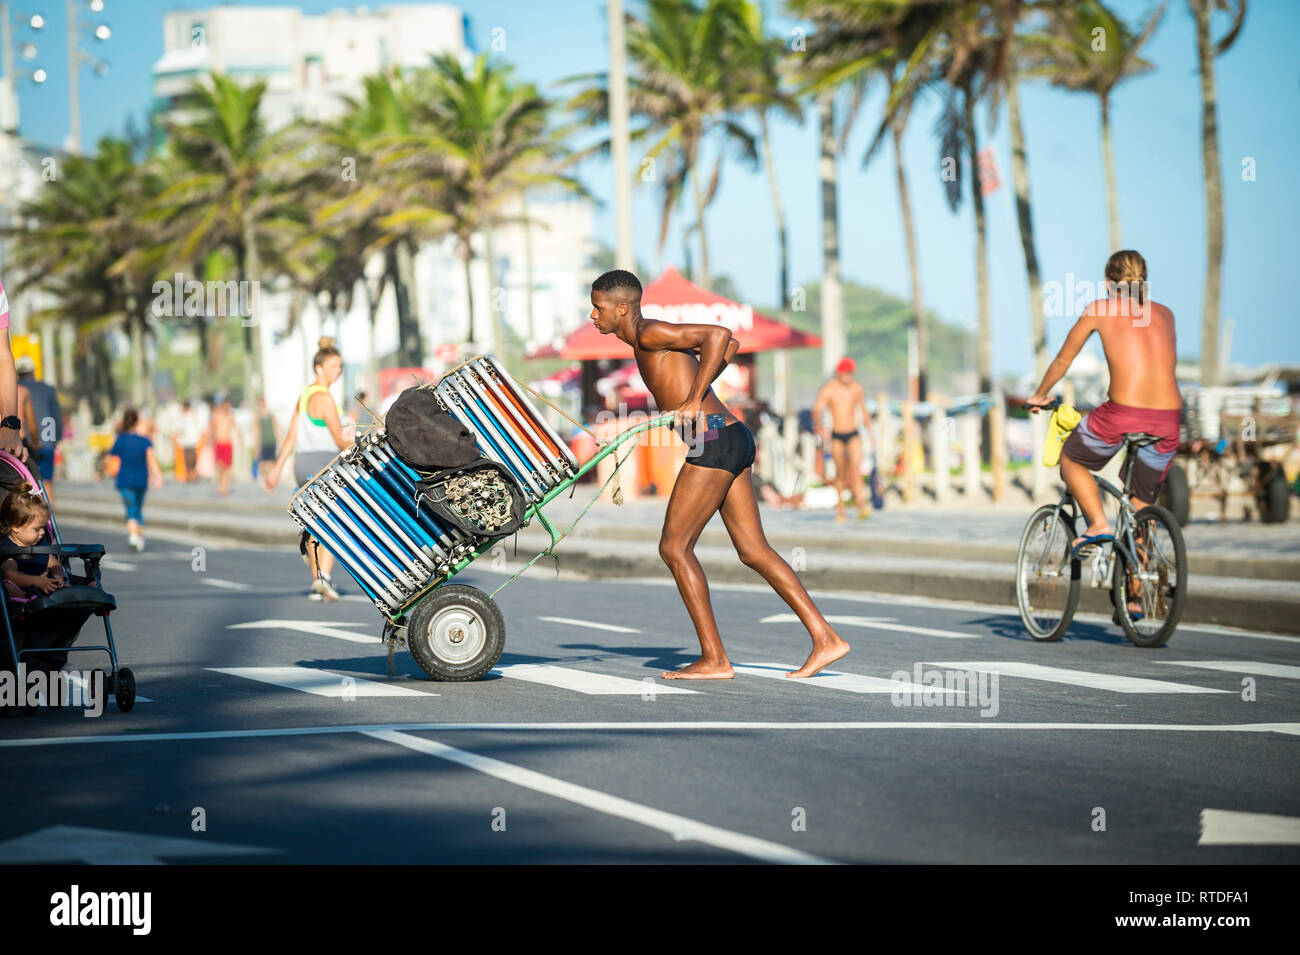 RIO DE JANEIRO - MARCH 26, 2017: A young Brazilian worker pushes a cart of folded chairs from a beach stand across the beachfront road in Ipanema. Stock Photo